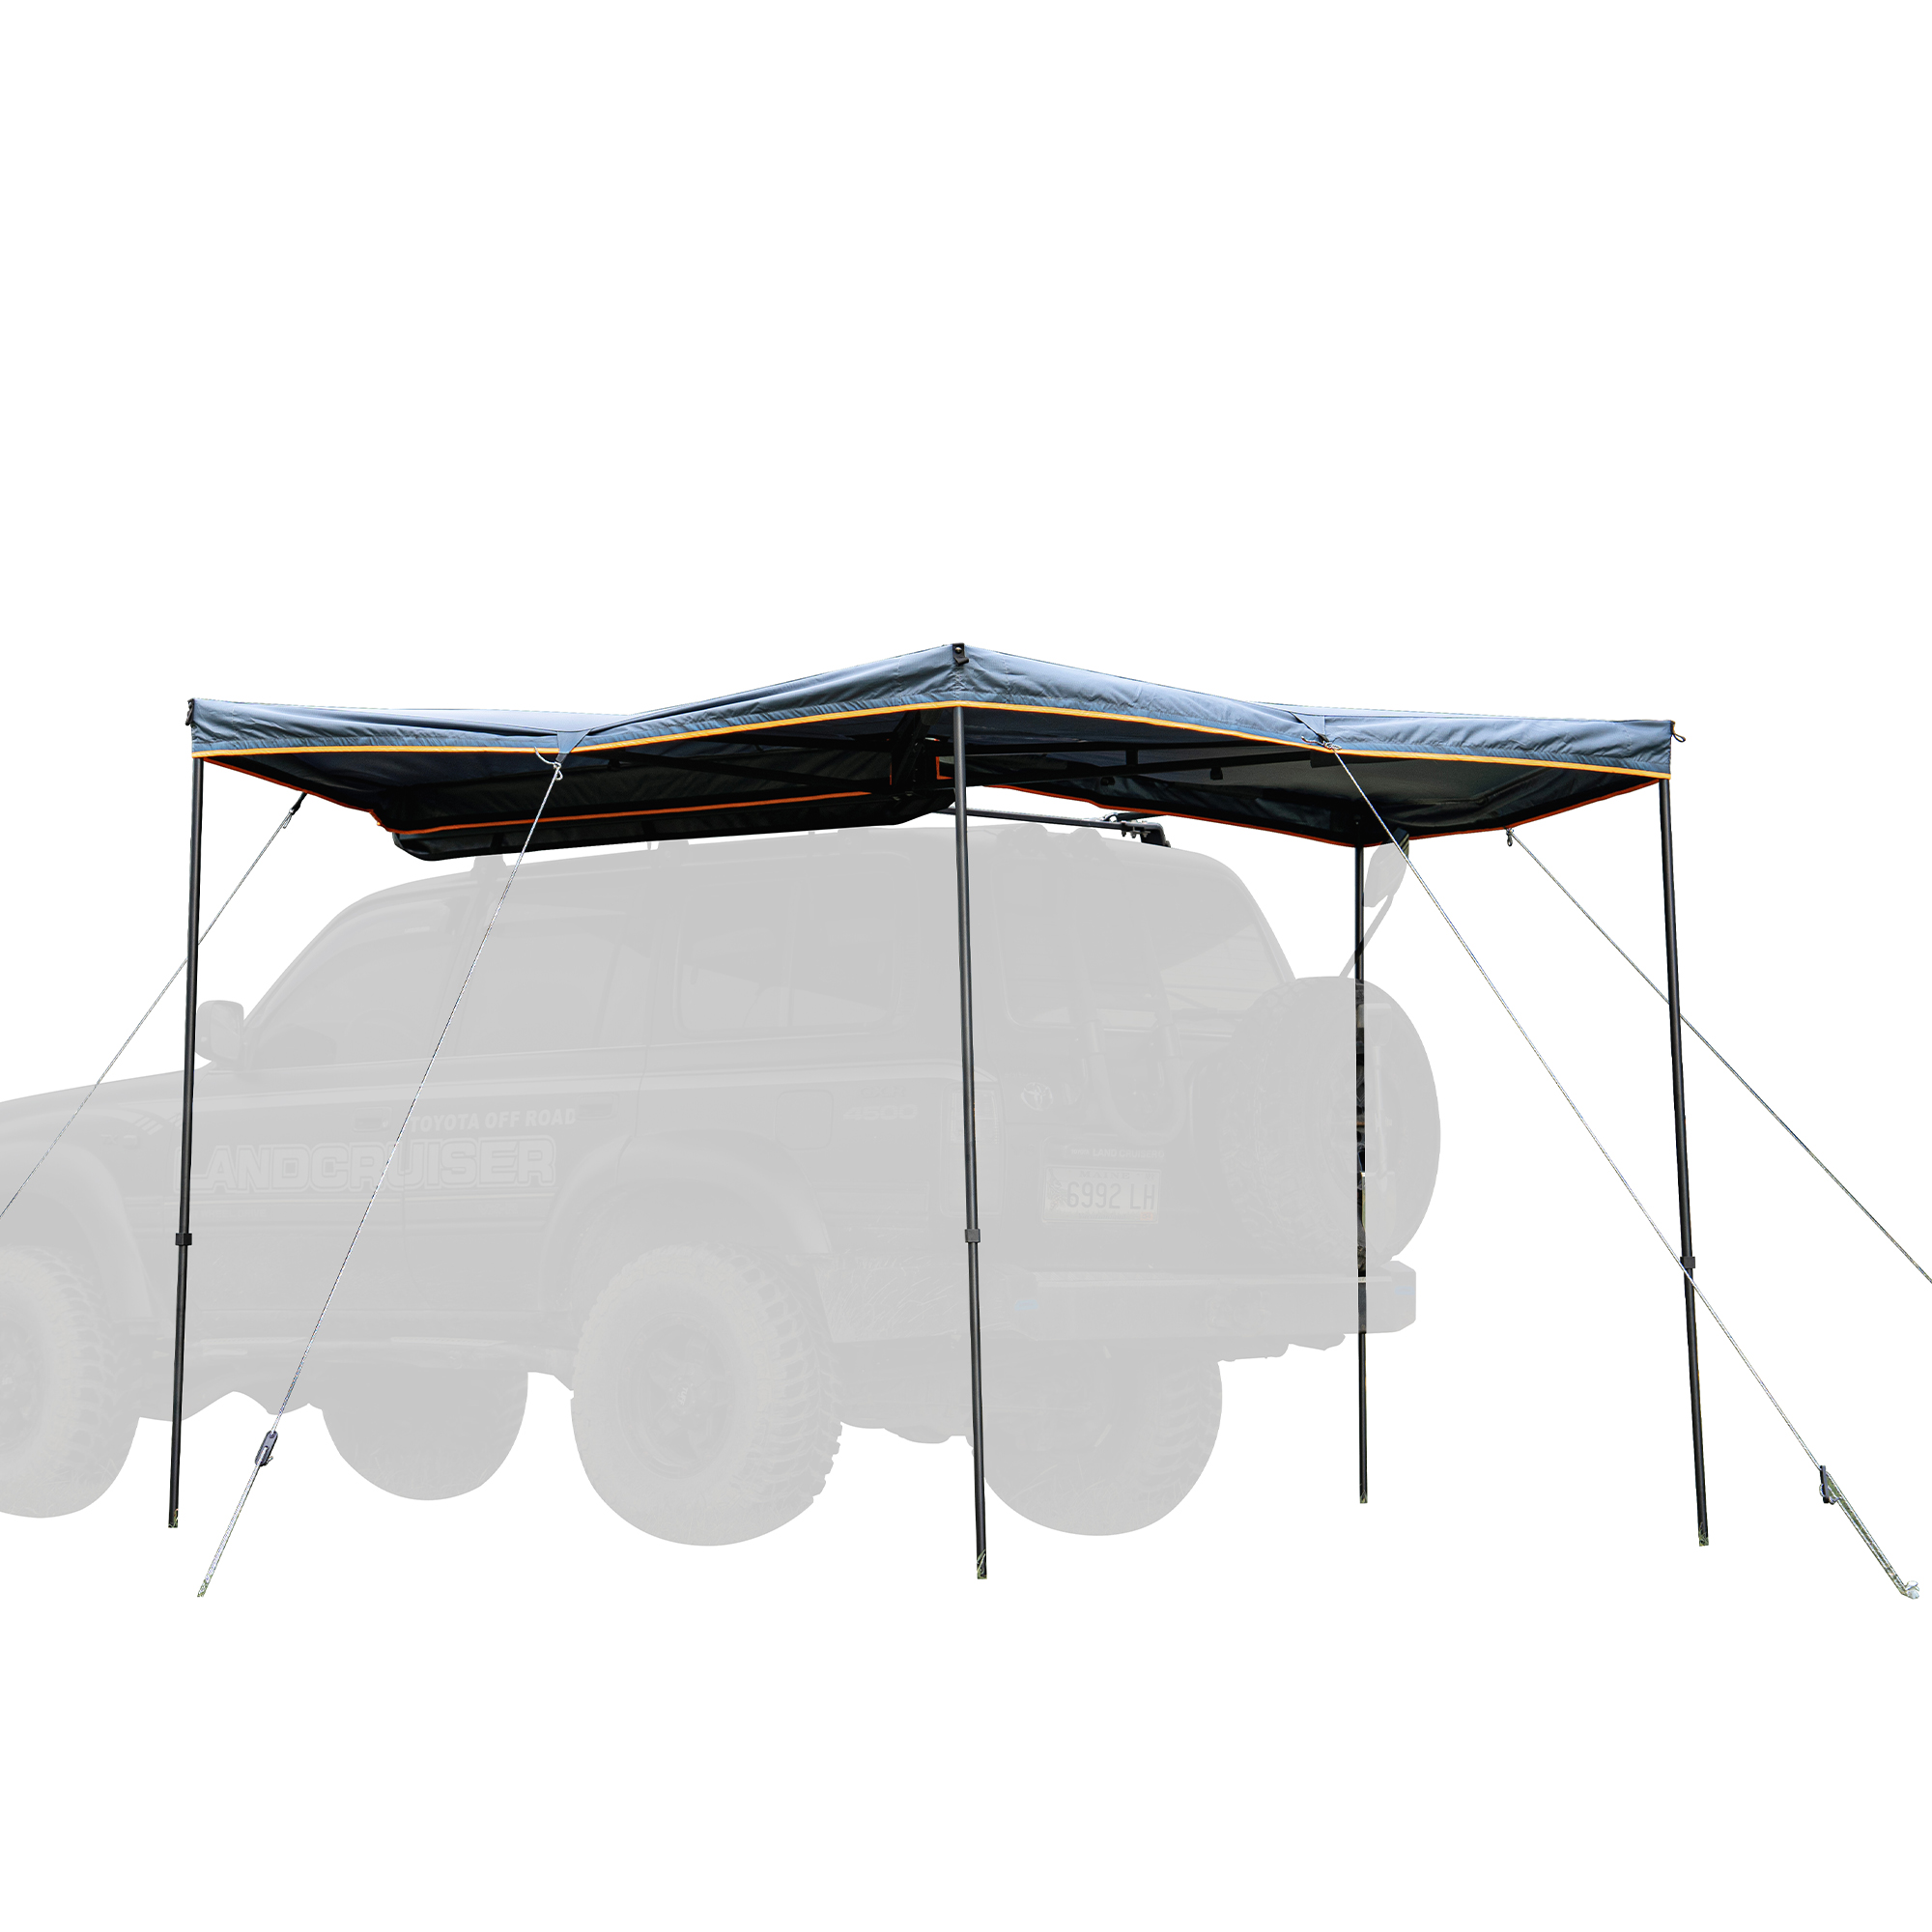 Trustmade Boneless 270° Car Side Awning Rooftop Pull Out Tent Shelter